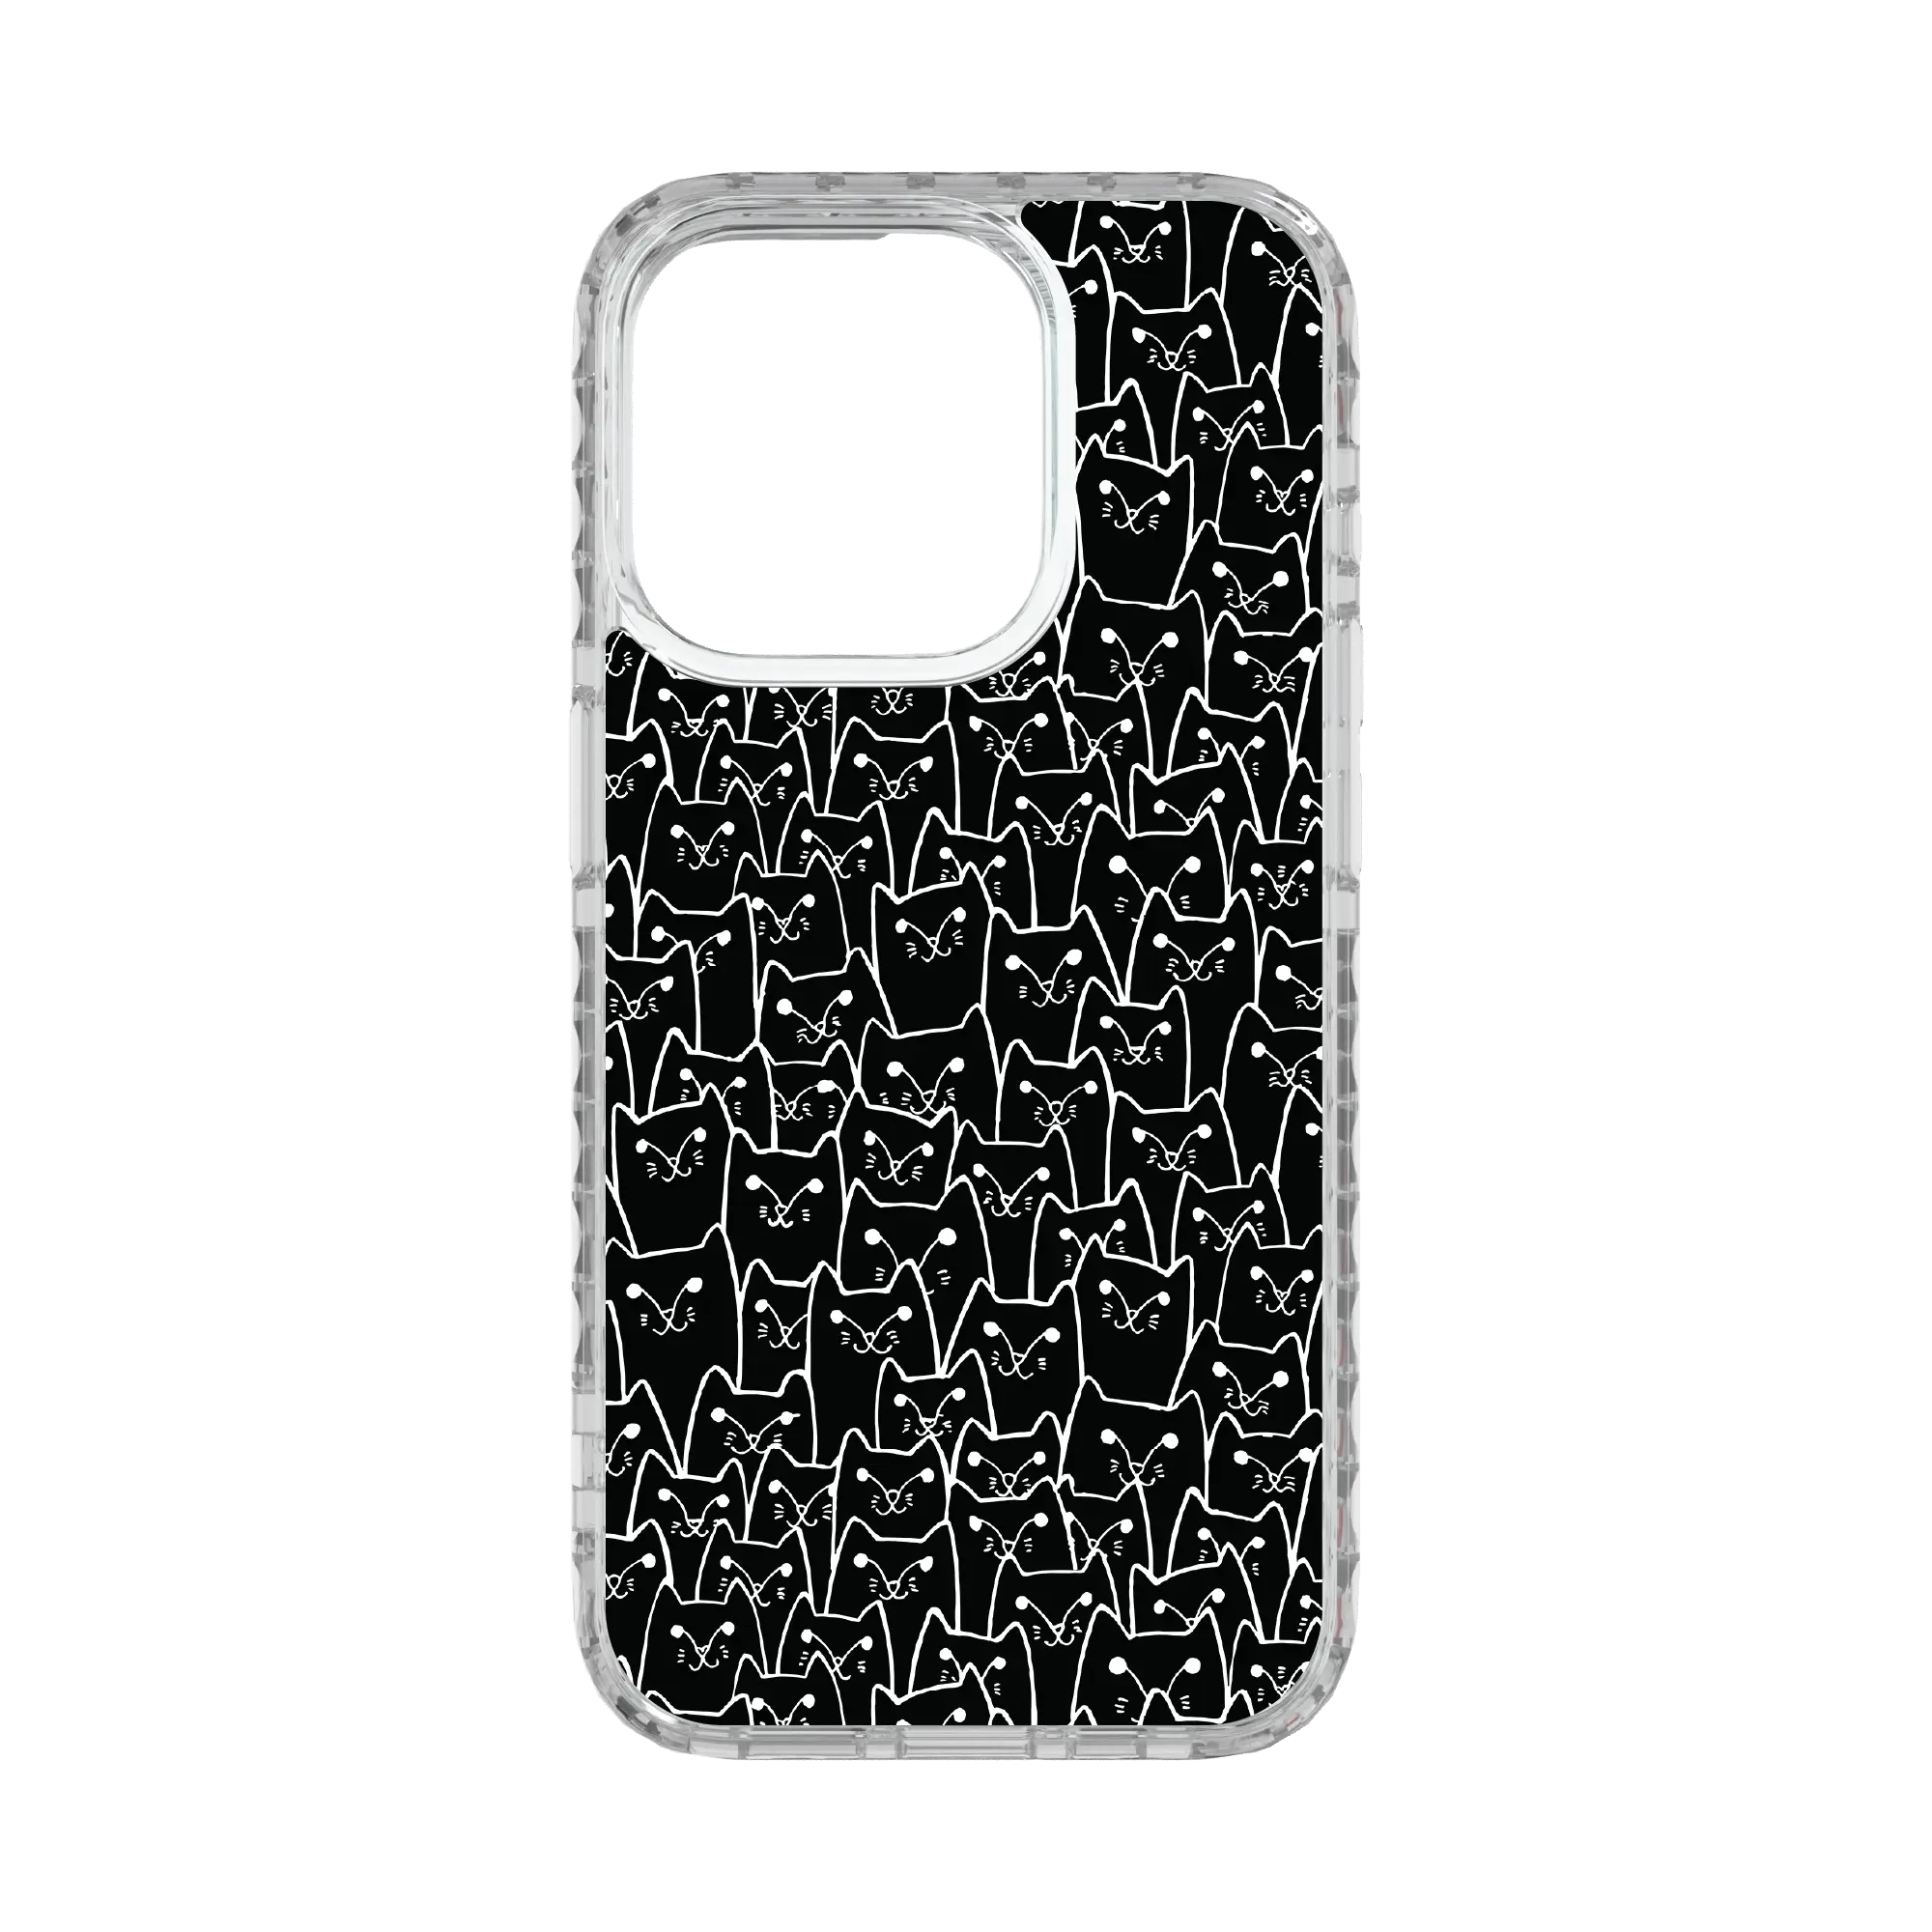 Apple-iPhone-15-Pro-Crystal-Clear Black Cat Pattern | Protective MagSafe Case | Cats Meow Series for Apple iPhone 15 Series cellhelmet cellhelmet